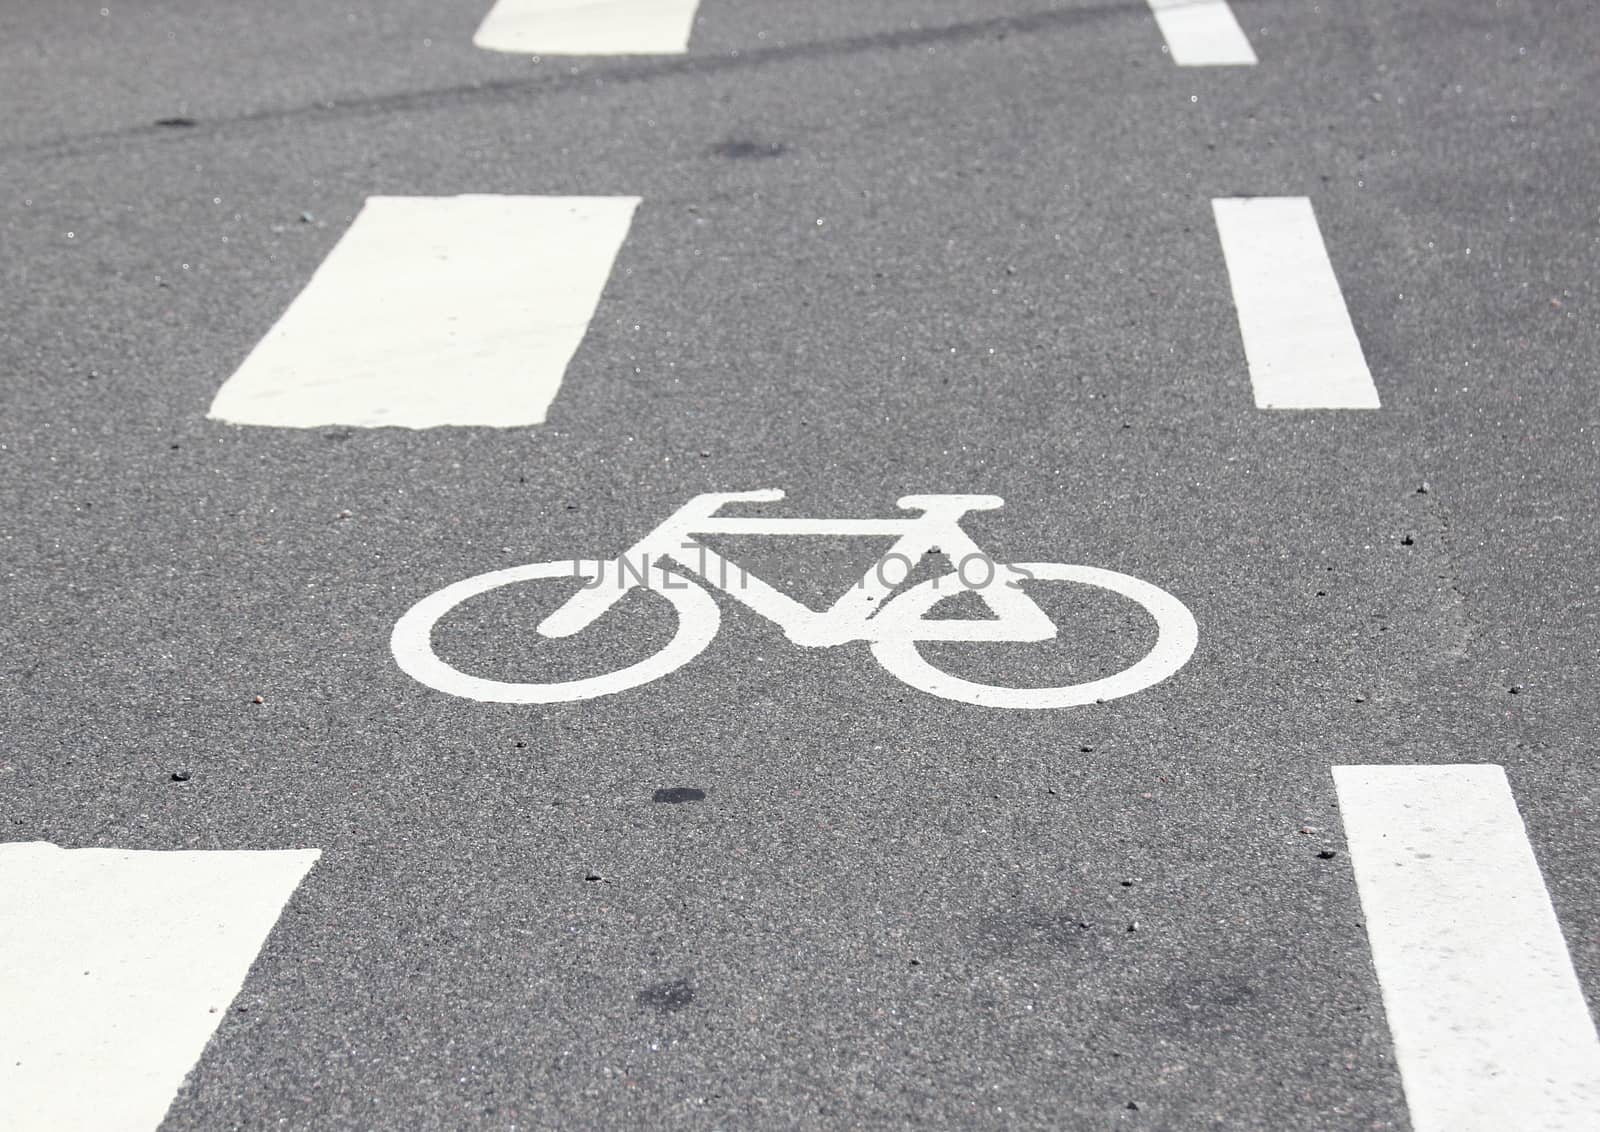 Horizontal bicycle sign on asphalt with white stripes